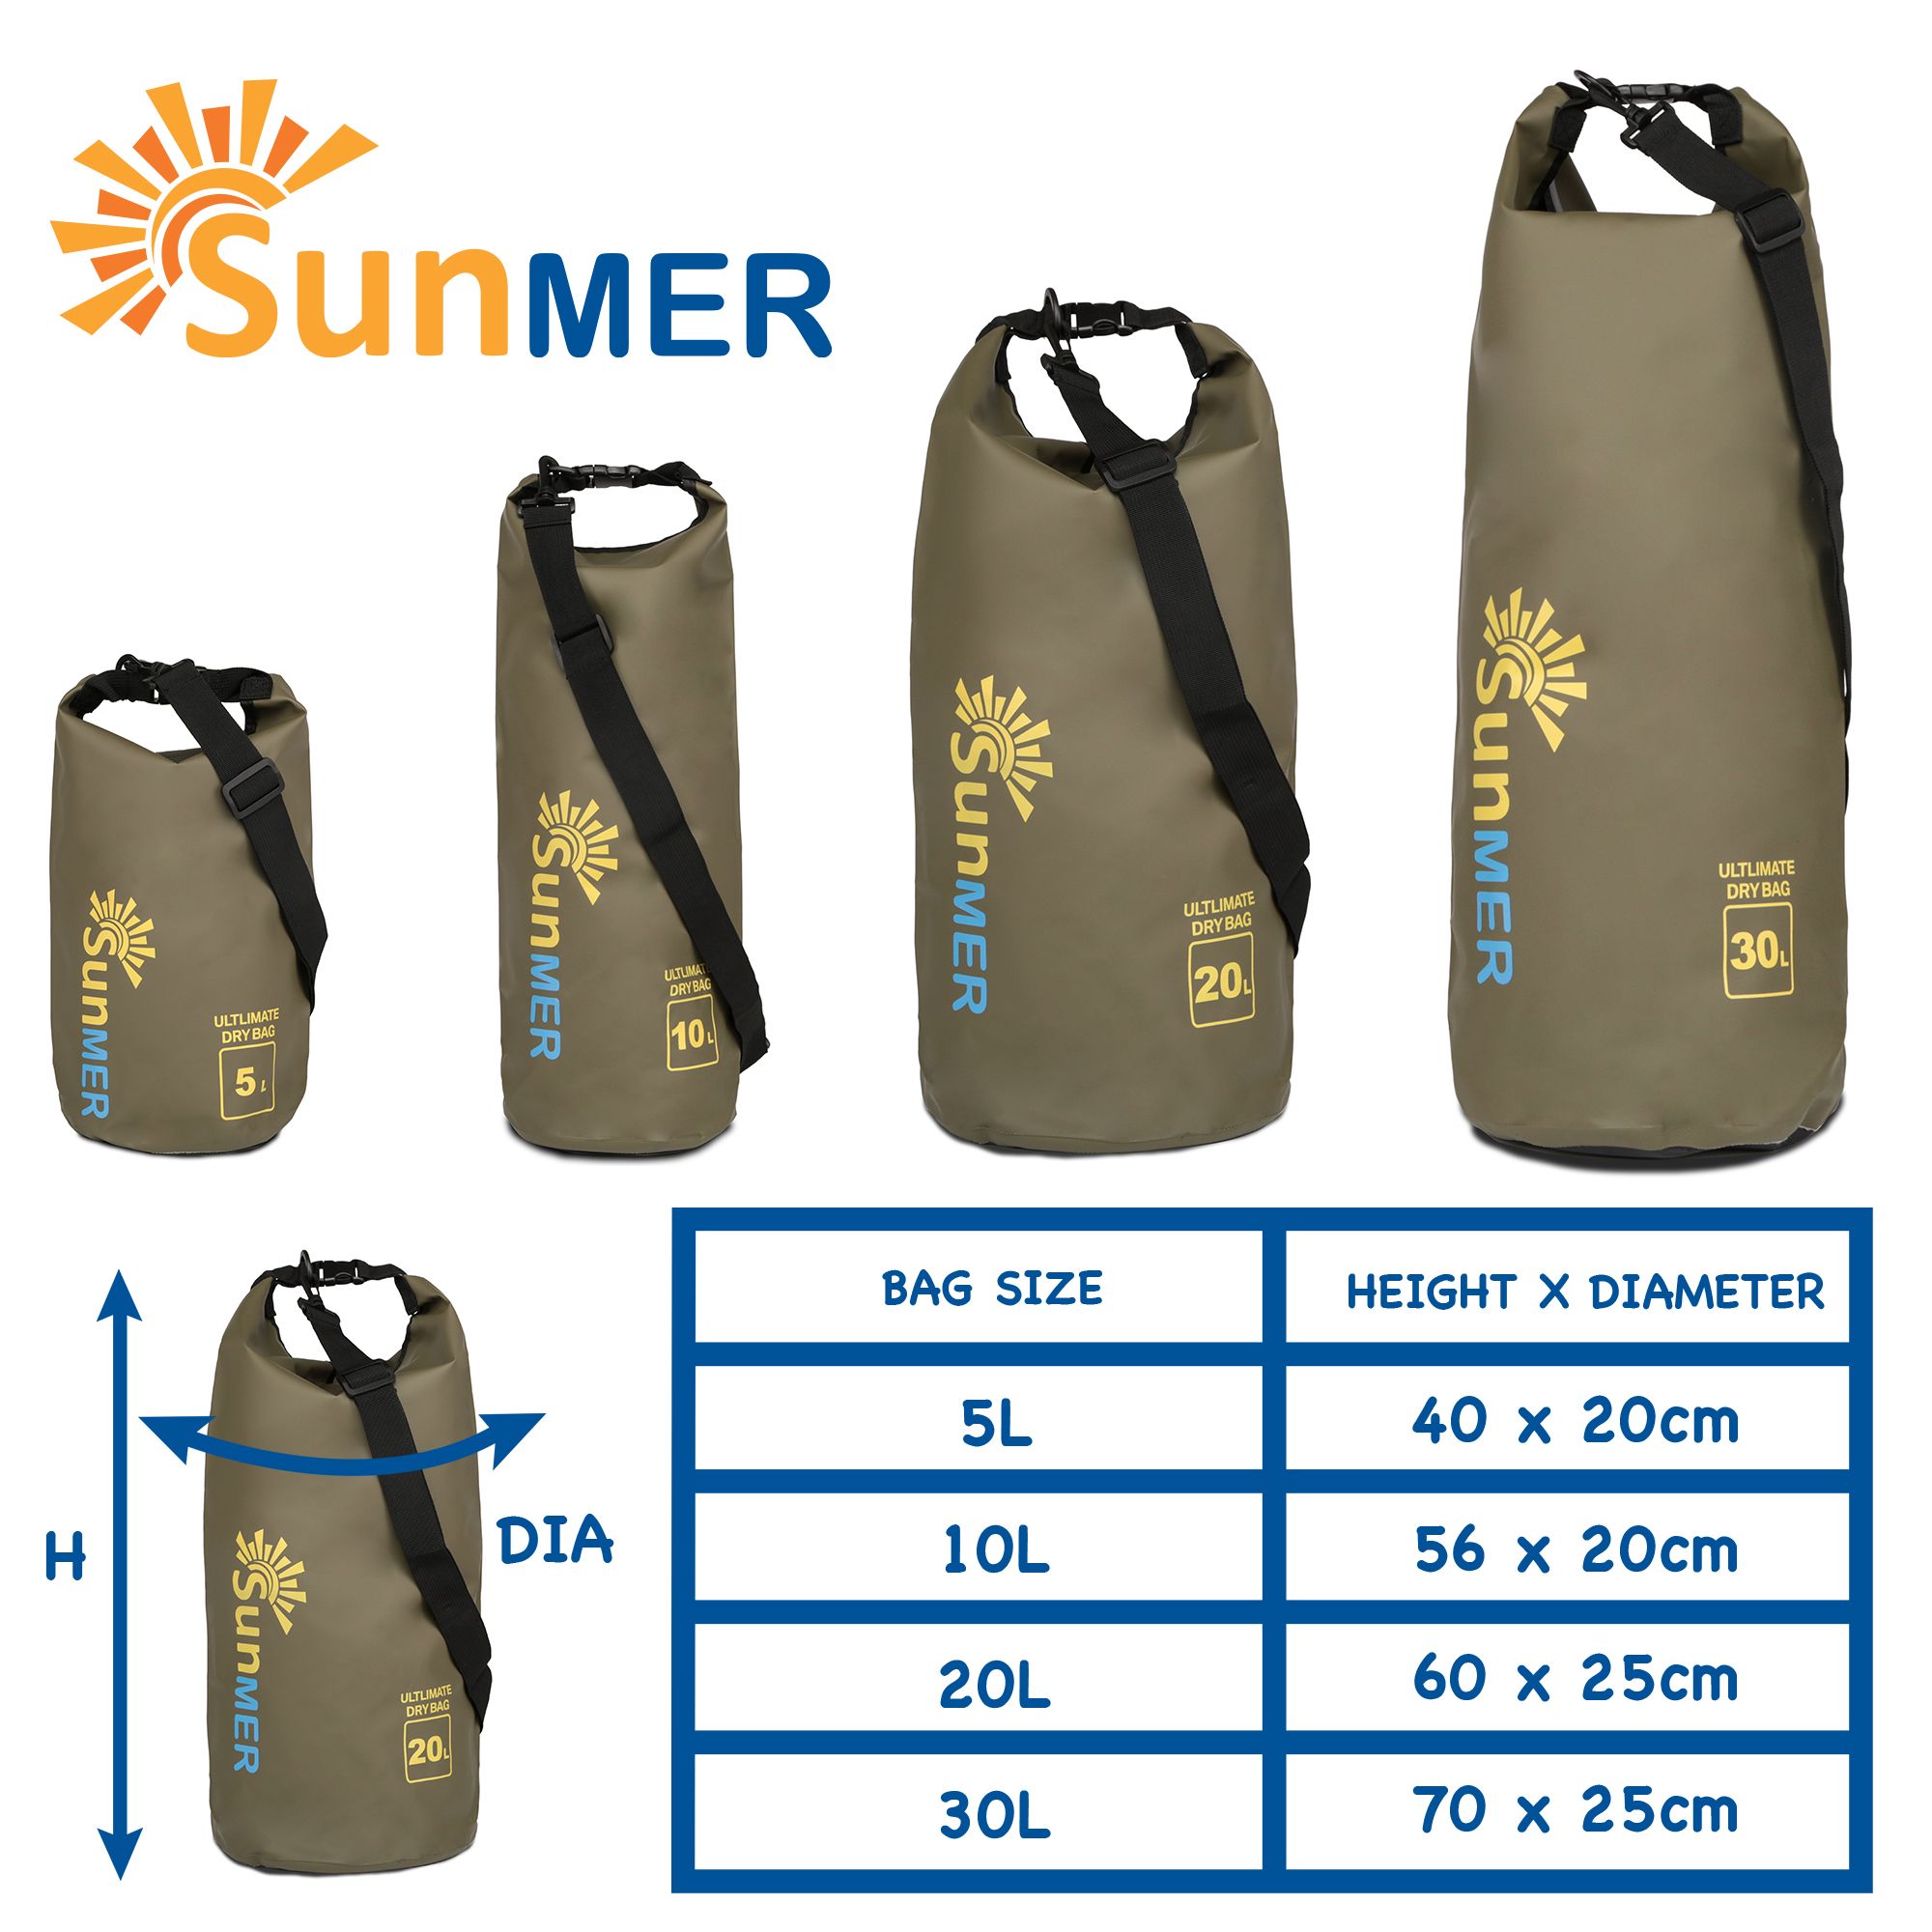 SUNMER 20L Dry Bag With Waterproof Phone Case - Army Green